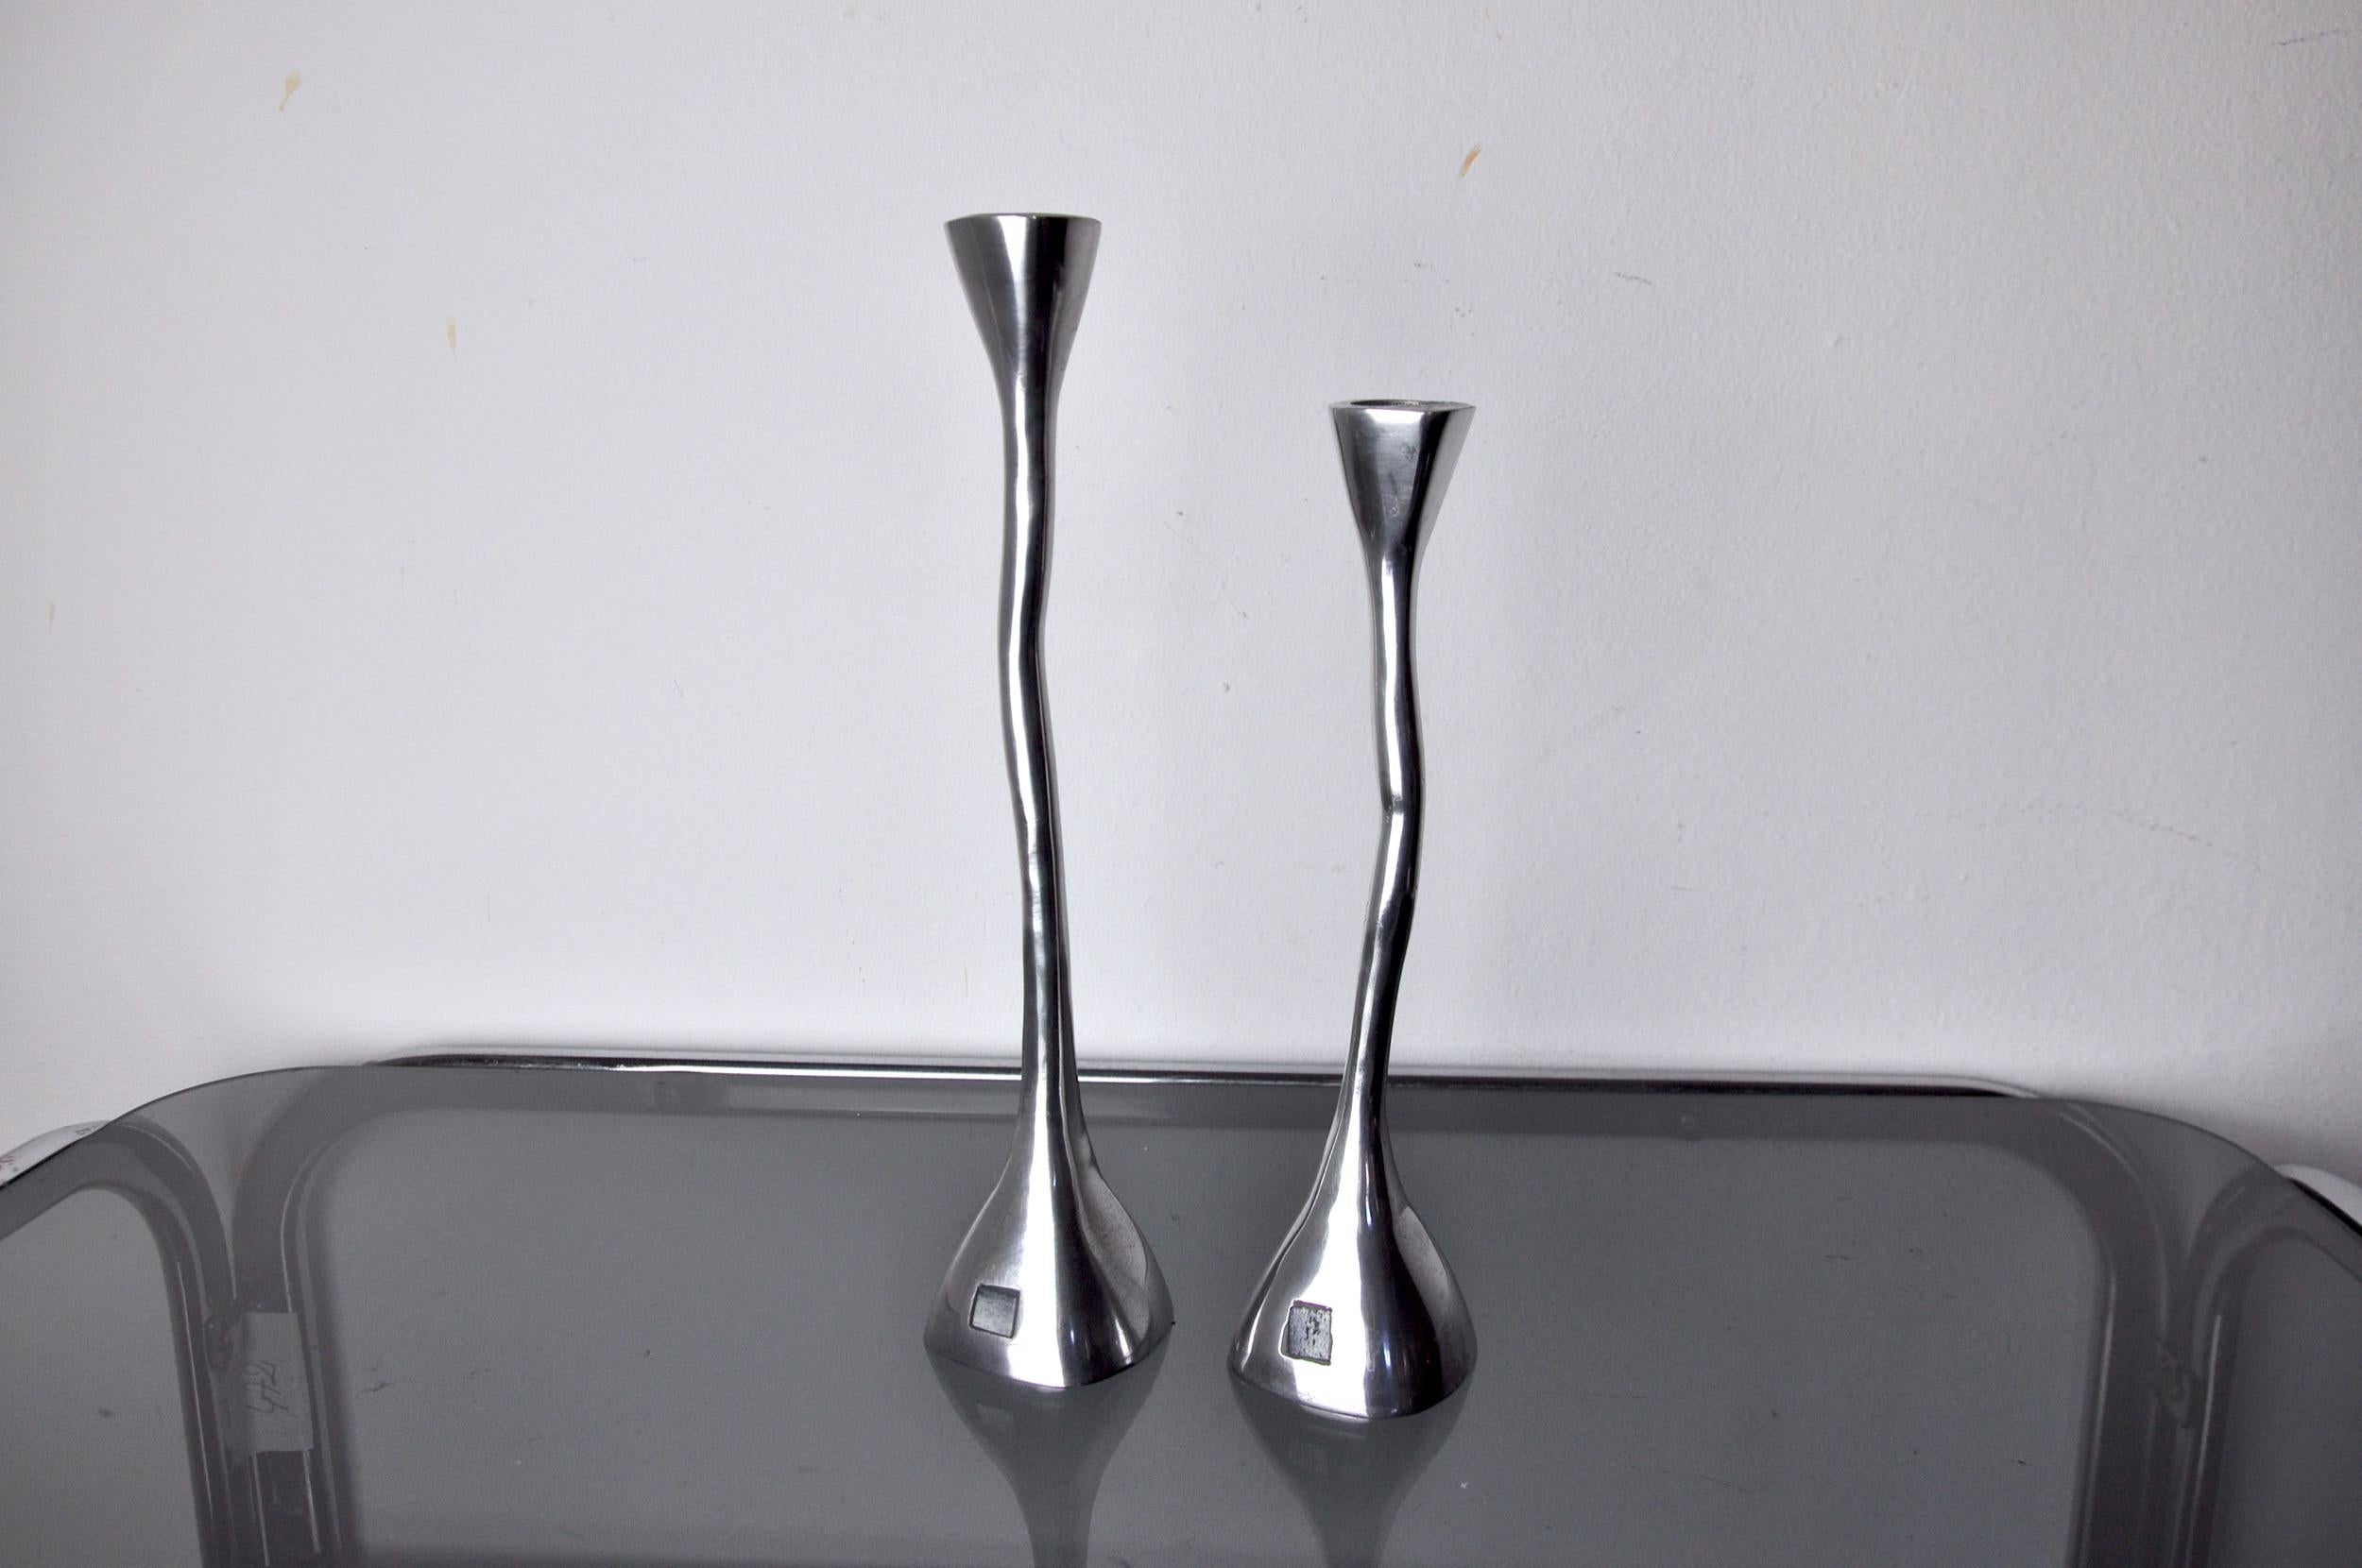 Metal Pair of Zigzag Candle Holders, Solid Aluminum and Polished Stone, Art3, Spain For Sale